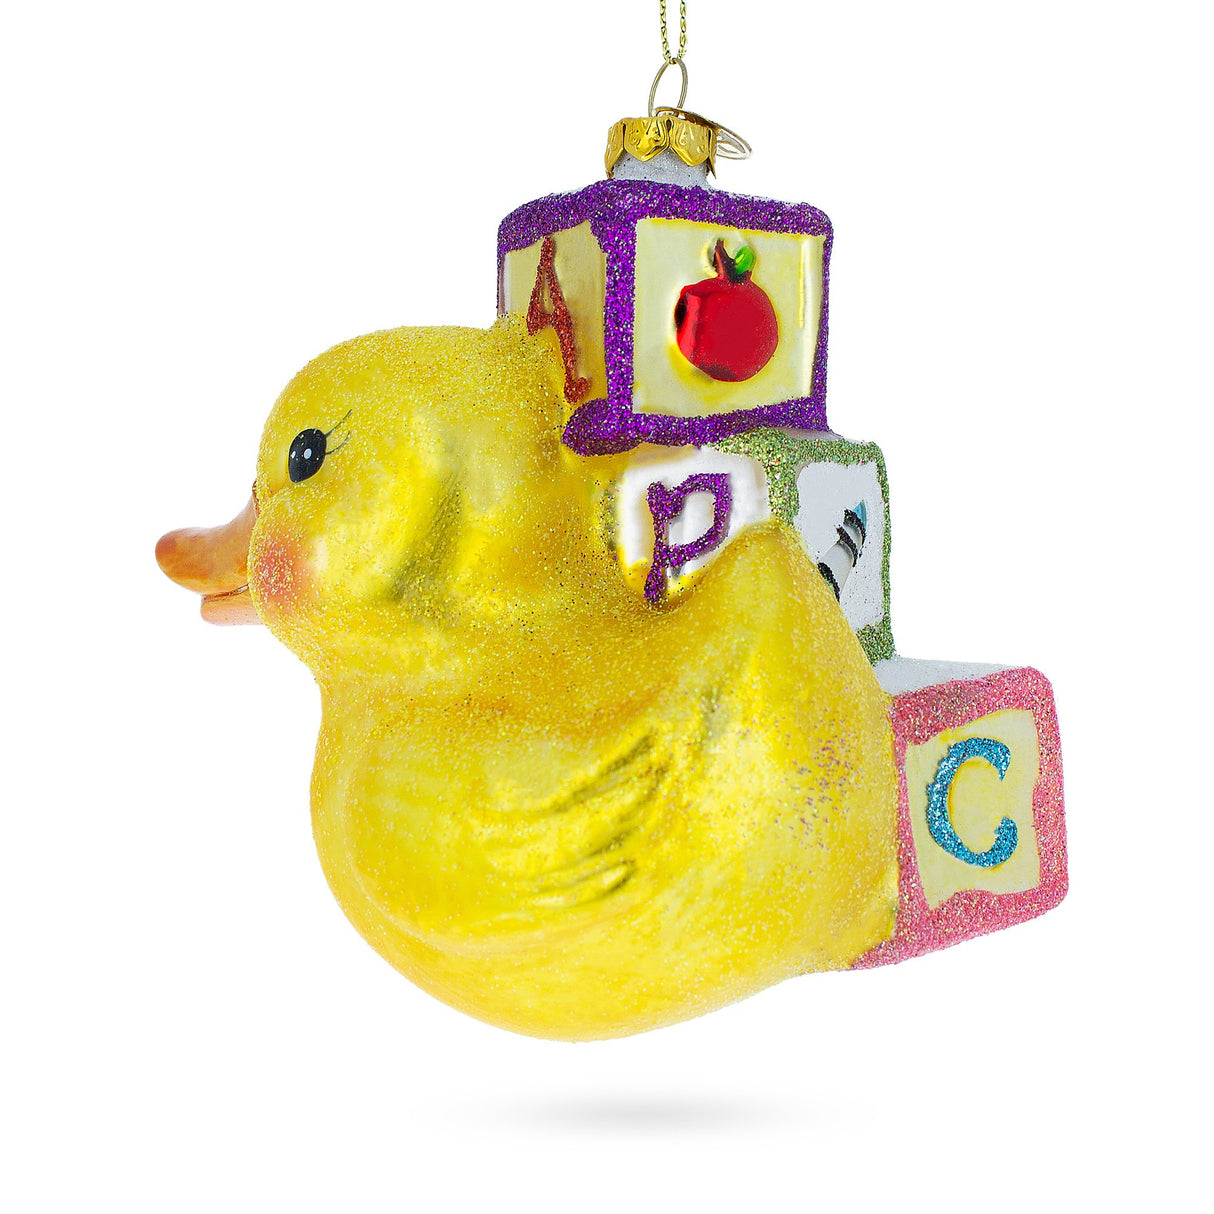 Educational Yellow Duck with ABC Blocks - Blown Glass Christmas Ornament ,dimensions in inches: 4.53 x 3.47 x 4.73